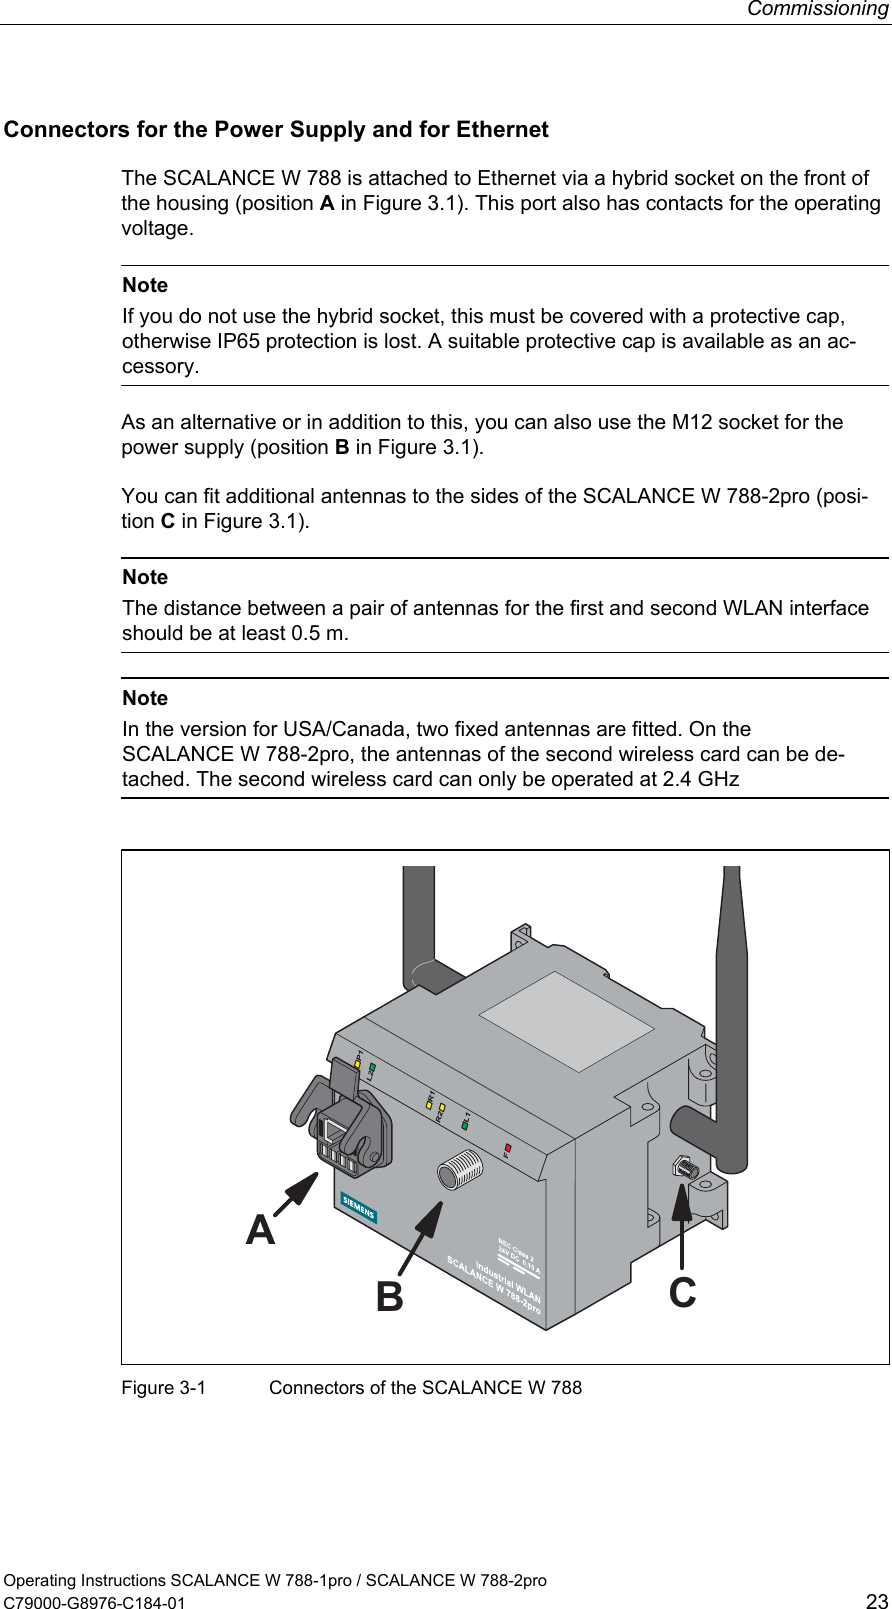 Commissioning Operating Instructions SCALANCE W 788-1pro / SCALANCE W 788-2pro C79000-G8976-C184-01  23 Connectors for the Power Supply and for Ethernet The SCALANCE W 788 is attached to Ethernet via a hybrid socket on the front of the housing (position A in Figure 3.1). This port also has contacts for the operating voltage.   Note If you do not use the hybrid socket, this must be covered with a protective cap, otherwise IP65 protection is lost. A suitable protective cap is available as an ac-cessory. As an alternative or in addition to this, you can also use the M12 socket for the power supply (position B in Figure 3.1). You can fit additional antennas to the sides of the SCALANCE W 788-2pro (posi-tion C in Figure 3.1).   Note The distance between a pair of antennas for the first and second WLAN interface should be at least 0.5 m.   Note In the version for USA/Canada, two fixed antennas are fitted. On the SCALANCE W 788-2pro, the antennas of the second wireless card can be de-tached. The second wireless card can only be operated at 2.4 GHz  ABC Figure 3-1  Connectors of the SCALANCE W 788  